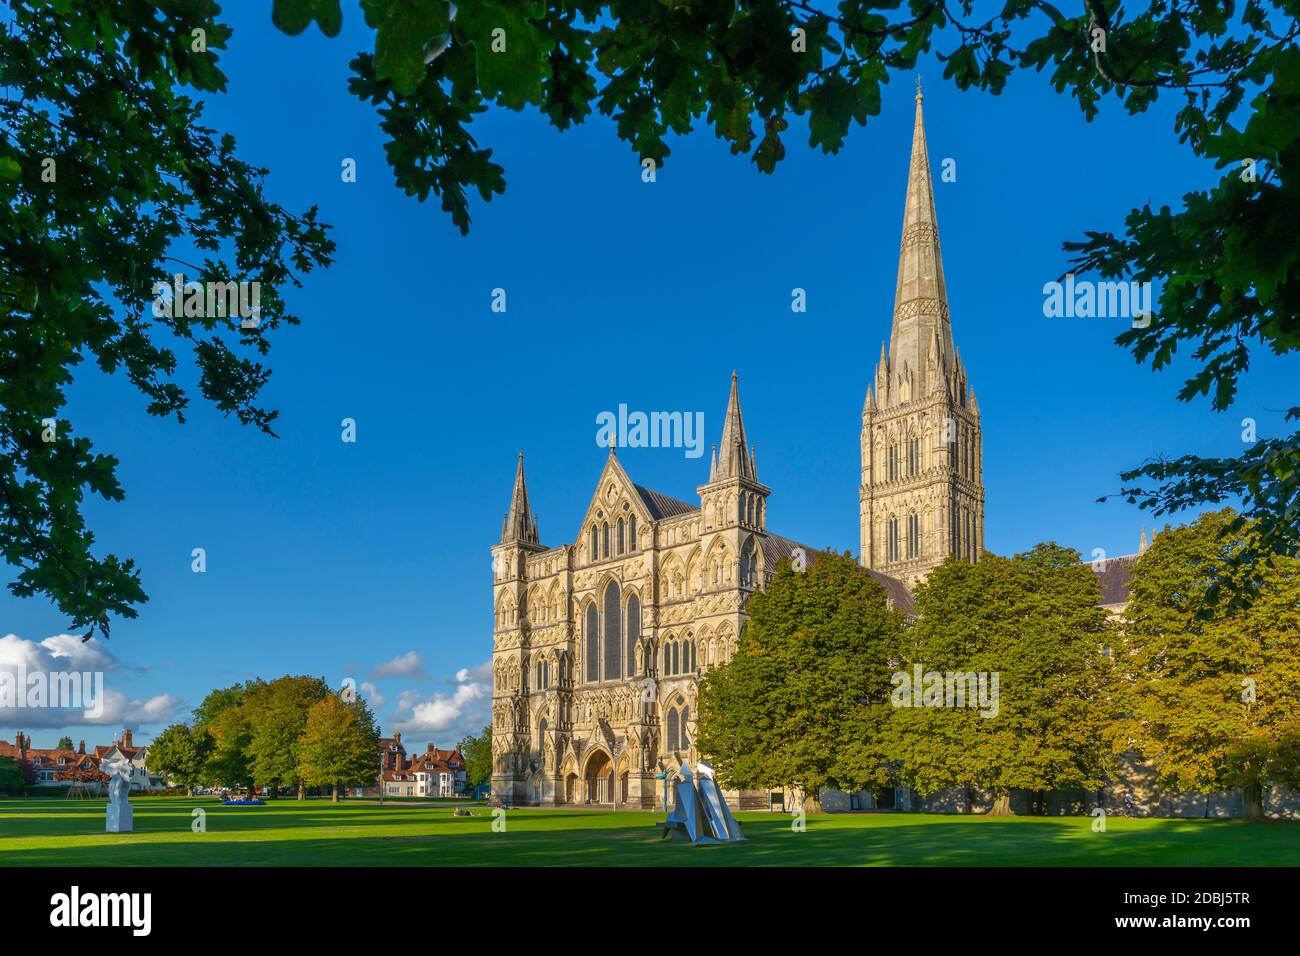 View of Salisbury Cathedral framed by trees, Salisbury, Wiltshire, England, United Kingdom, Europe Stock Photo